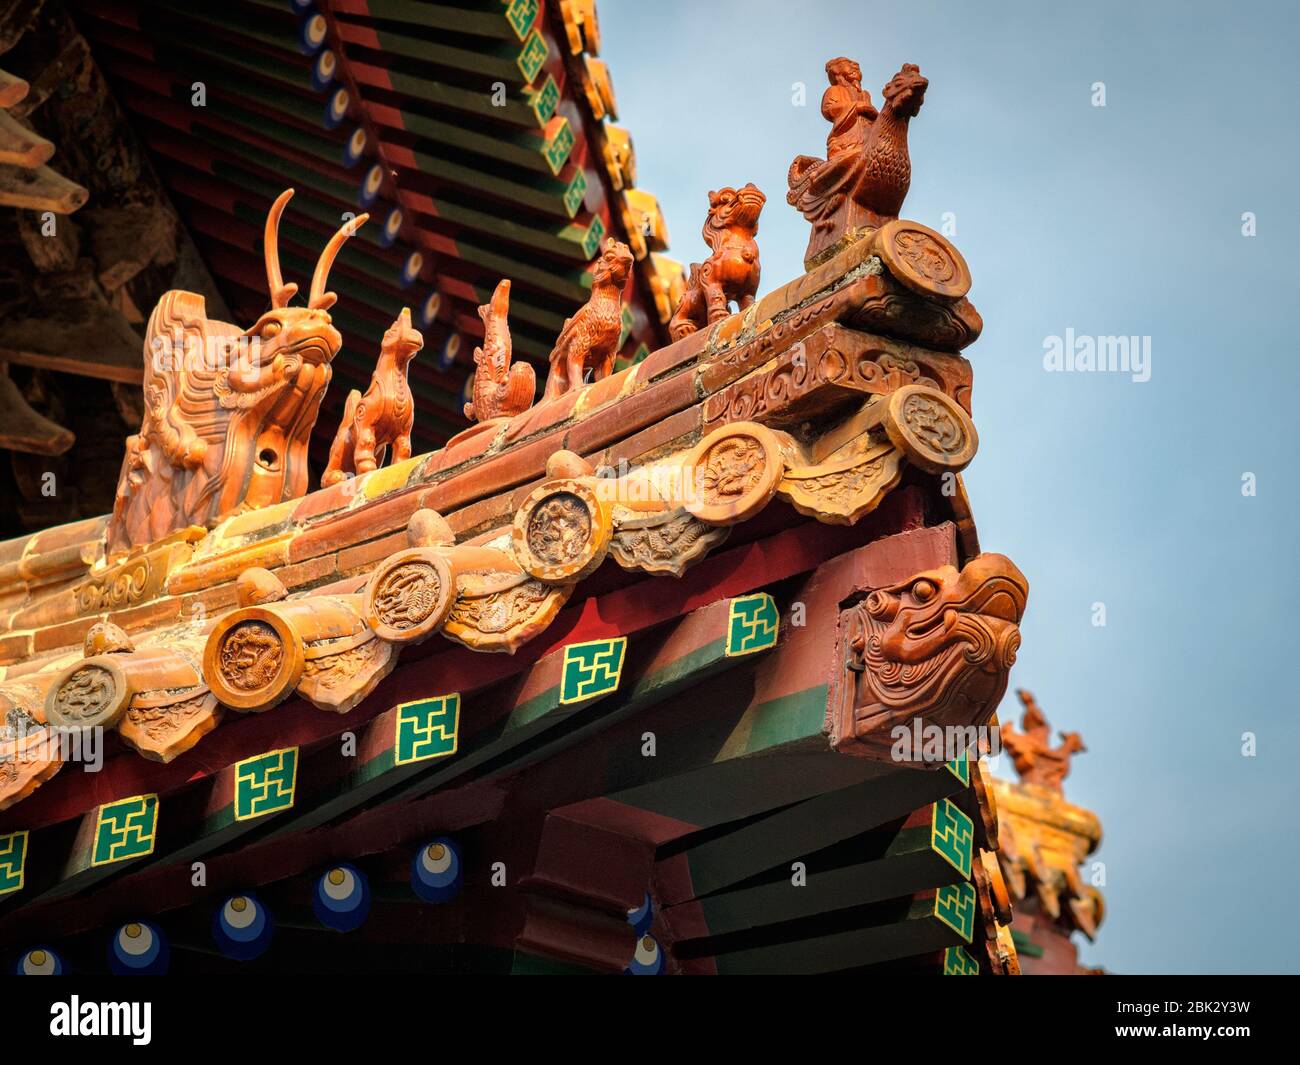 Roof figure decorations, architectural details from the Temple of Confucius, UNESCO World Heritage Site in Qufu, Shandong province, China Stock Photo